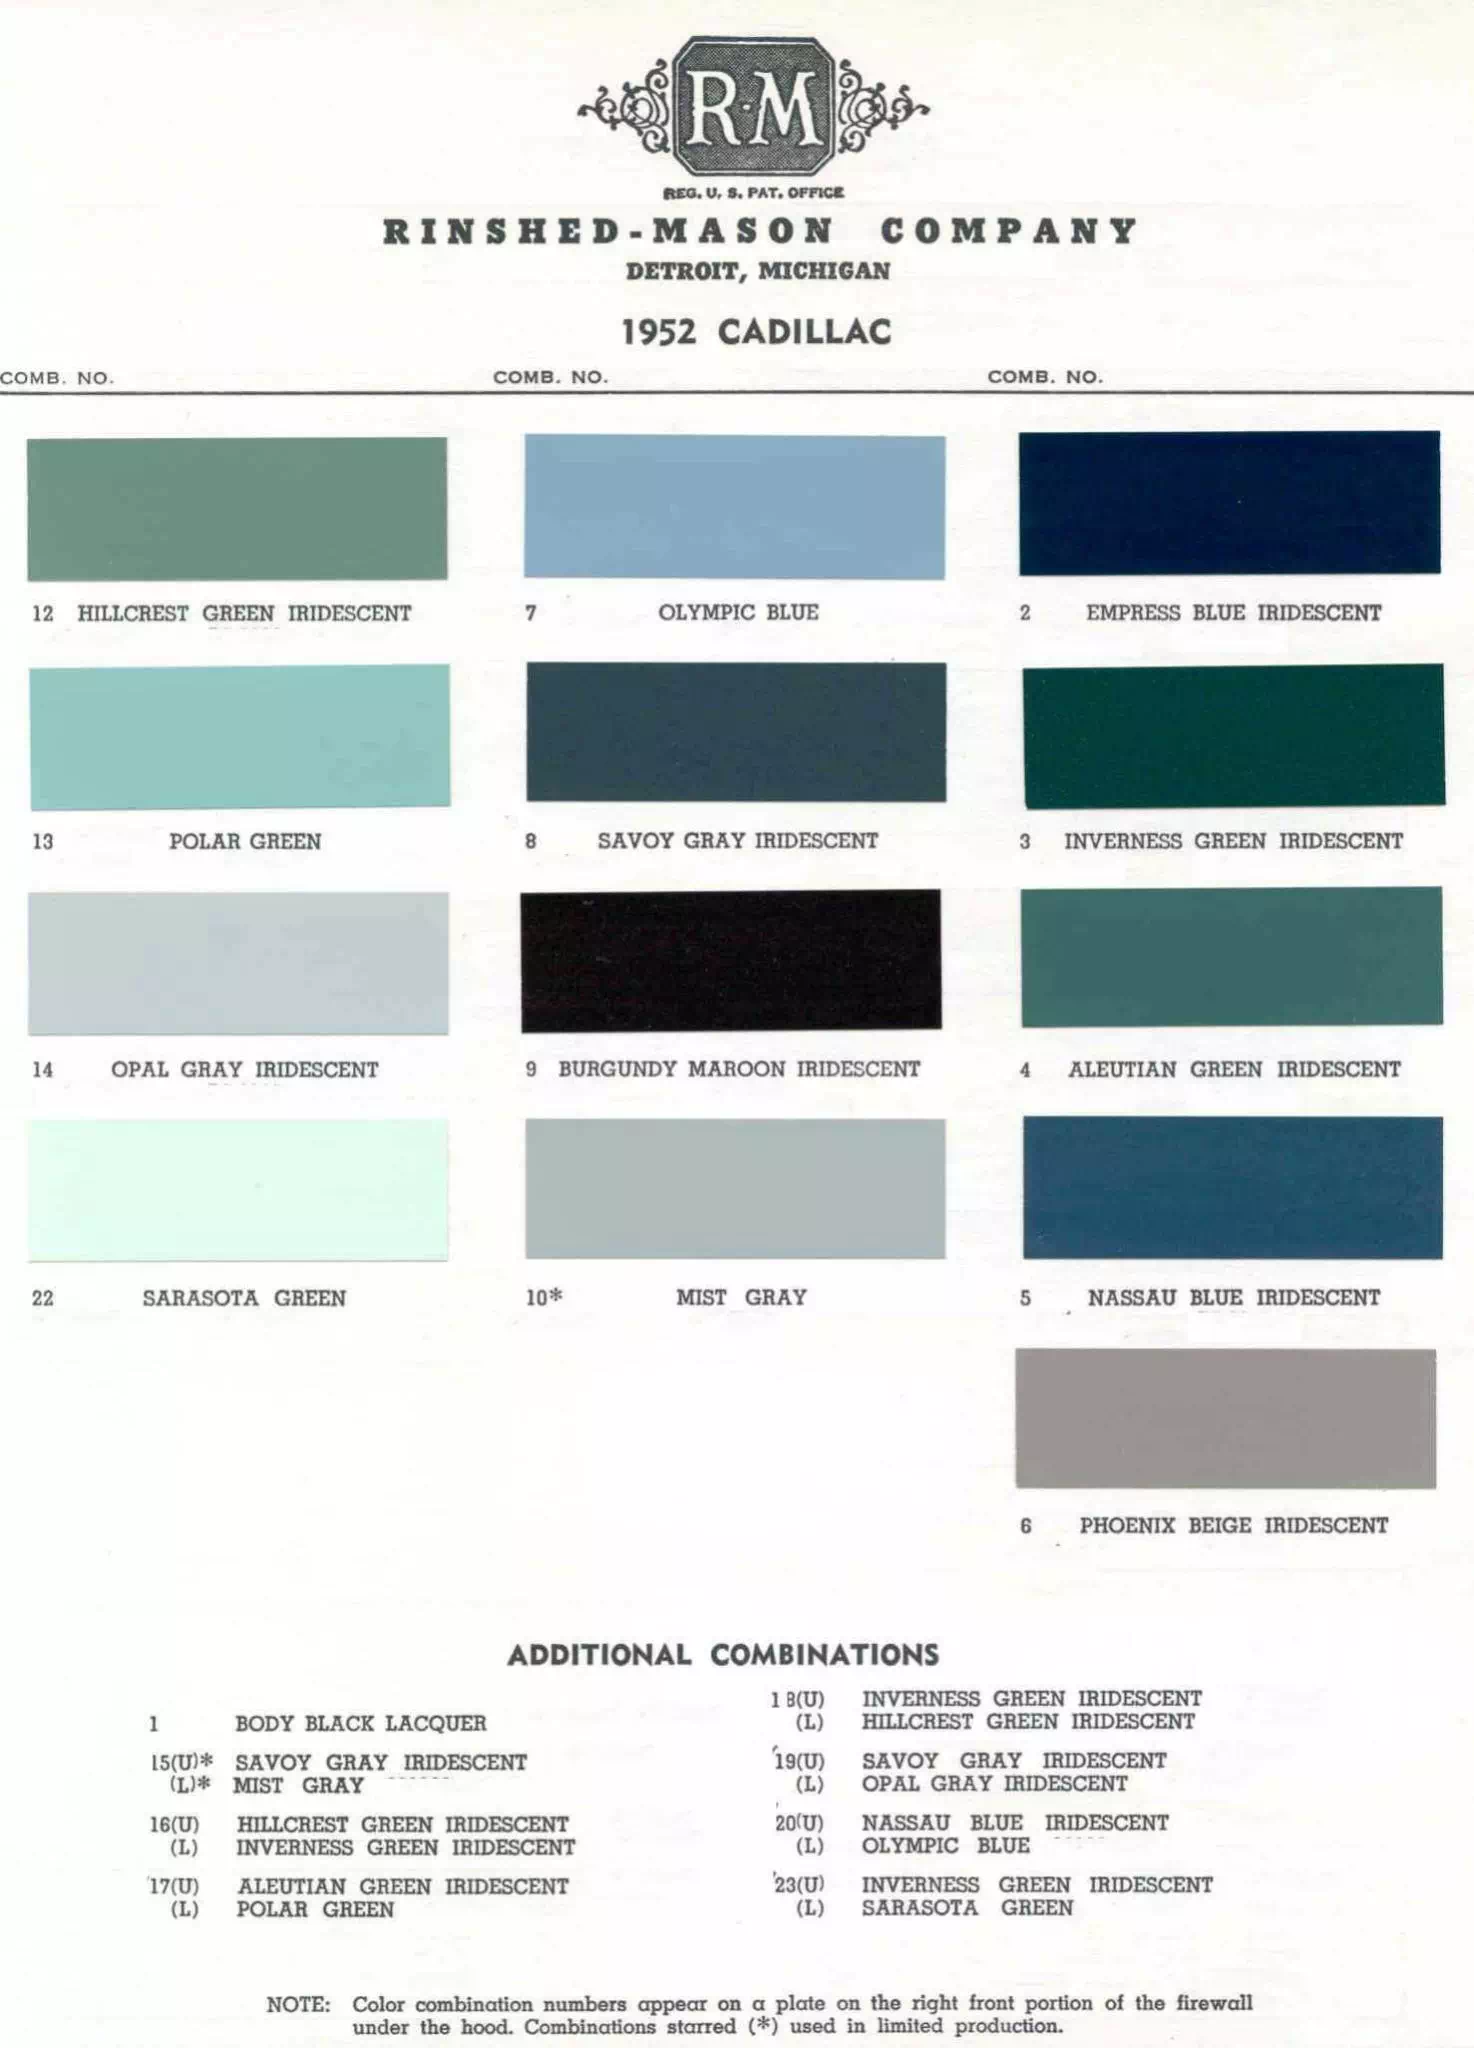 Summary of all Colors used on all Cadillac's in 1952